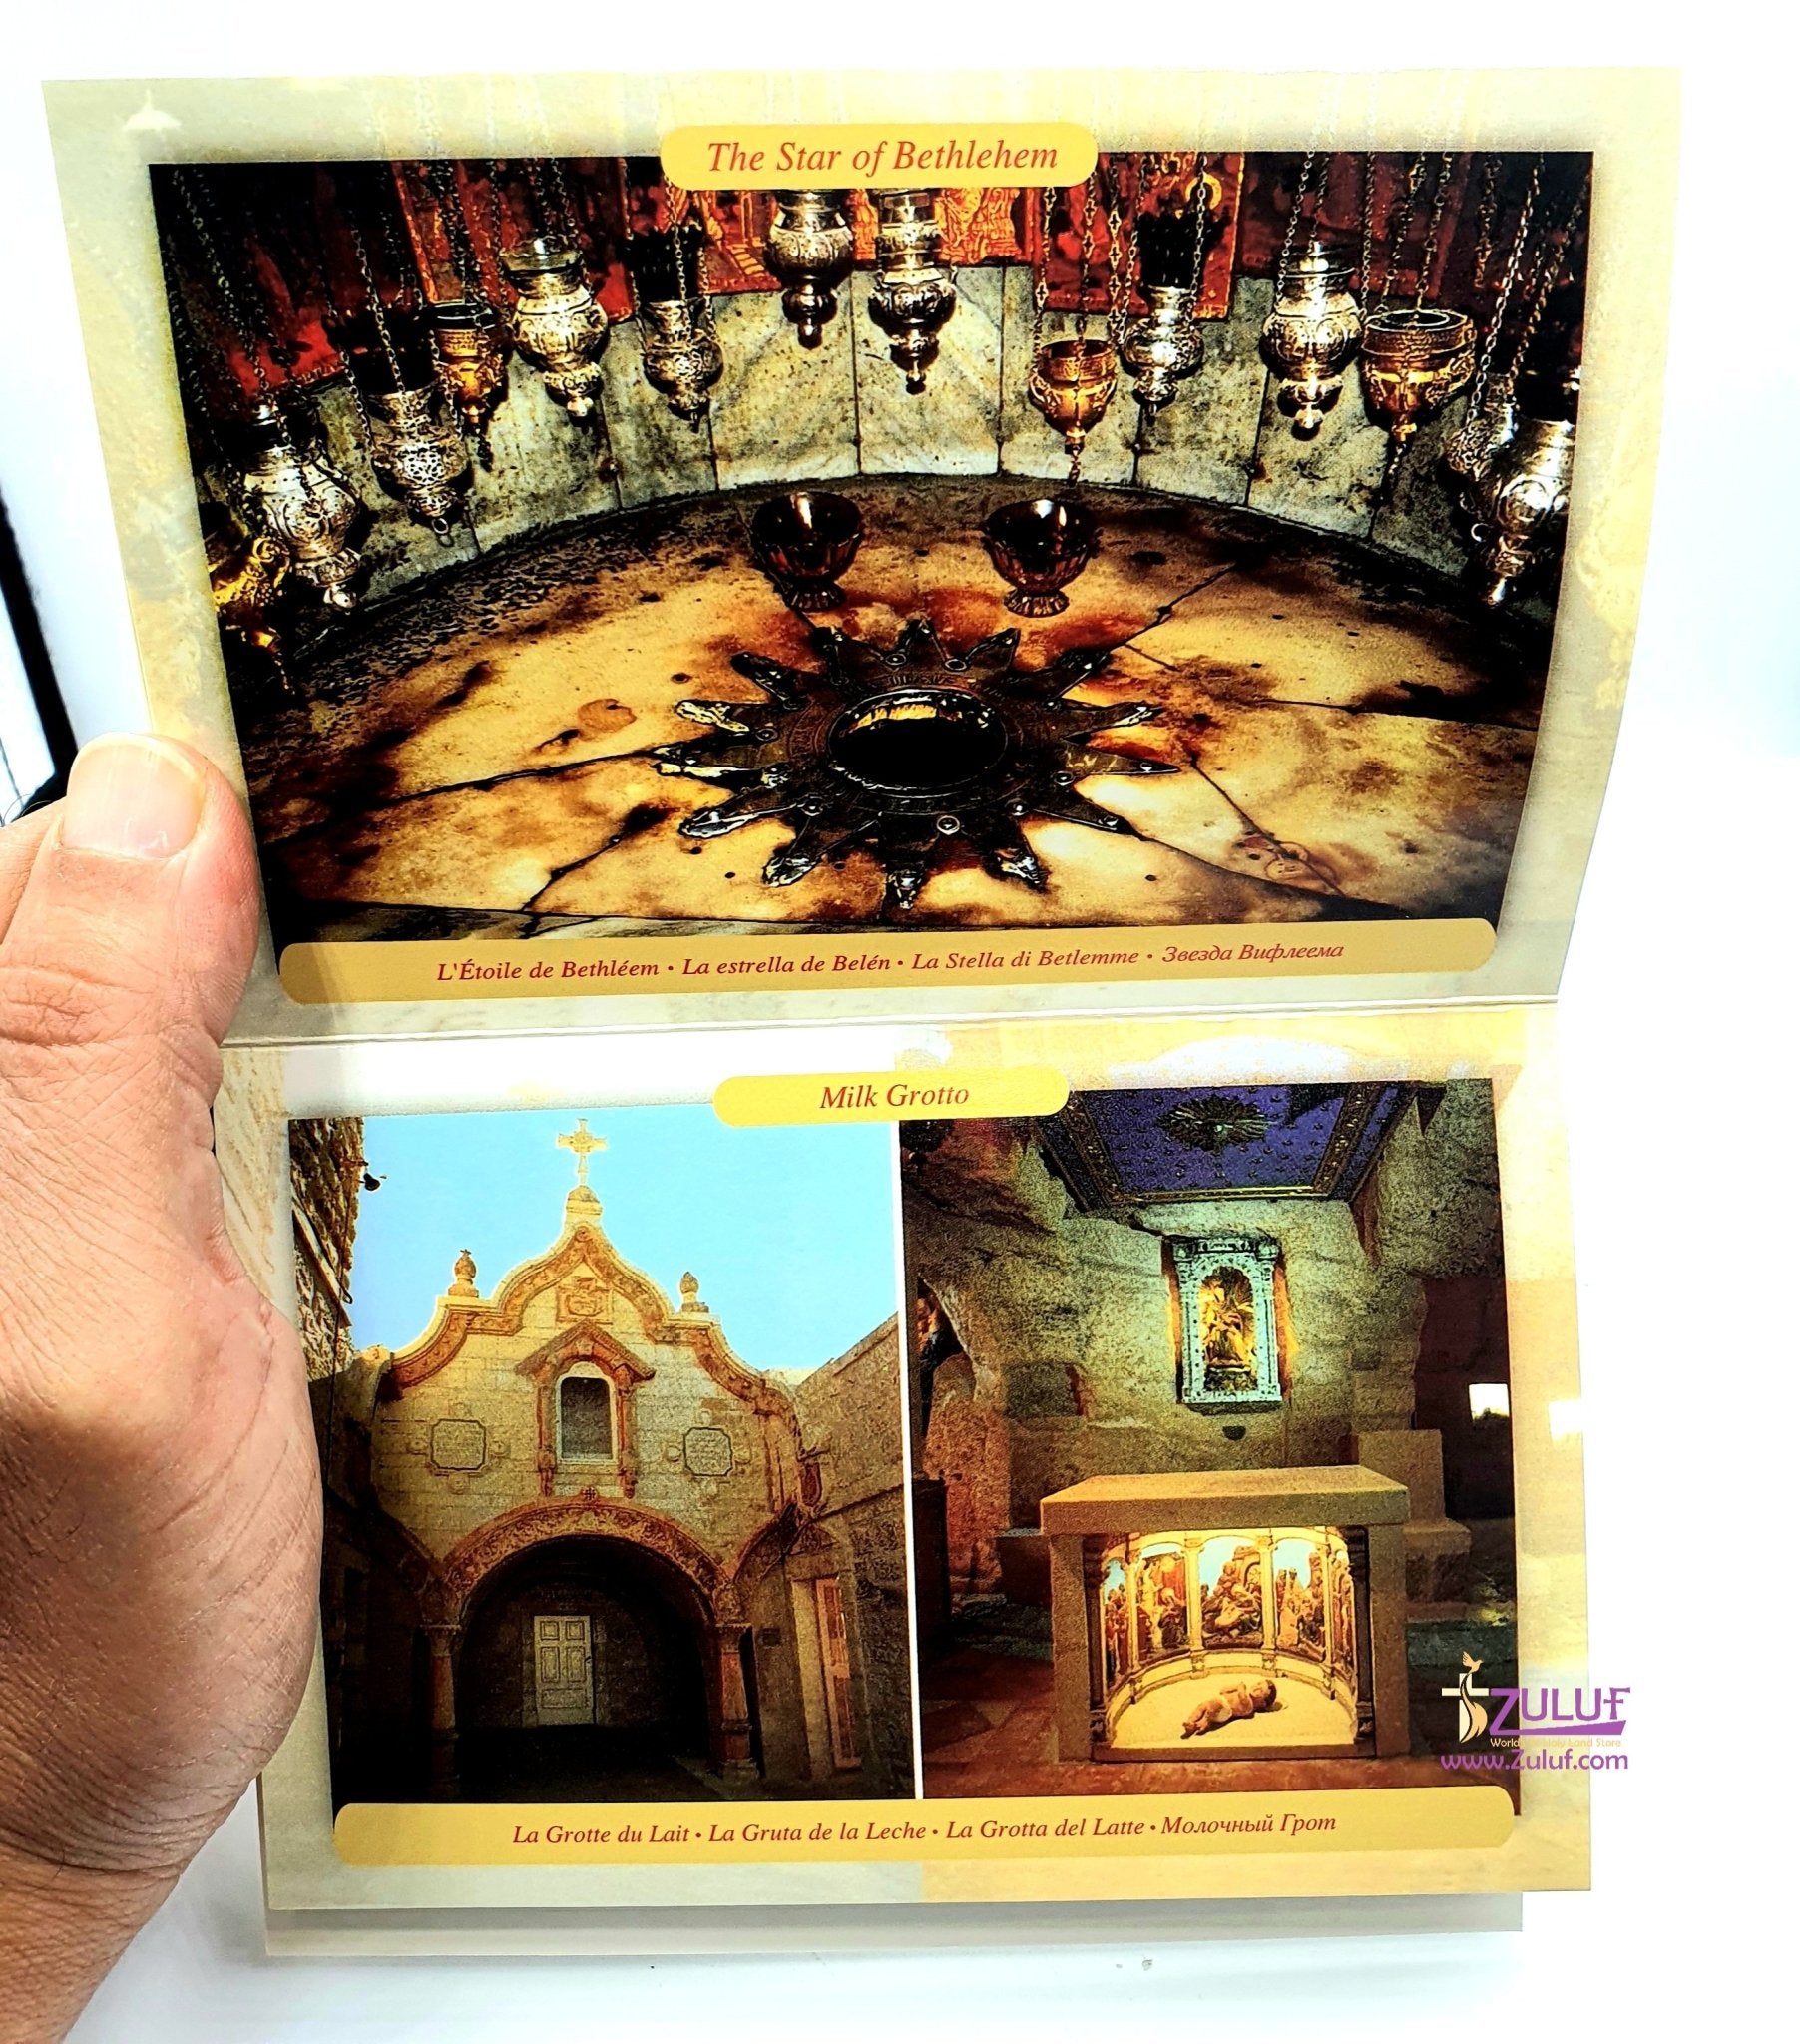 Holy Land Pictures & Sites in Bethlehem - 10 PostCards in 1 HLG212 - with Zuluf Certificate - Zuluf